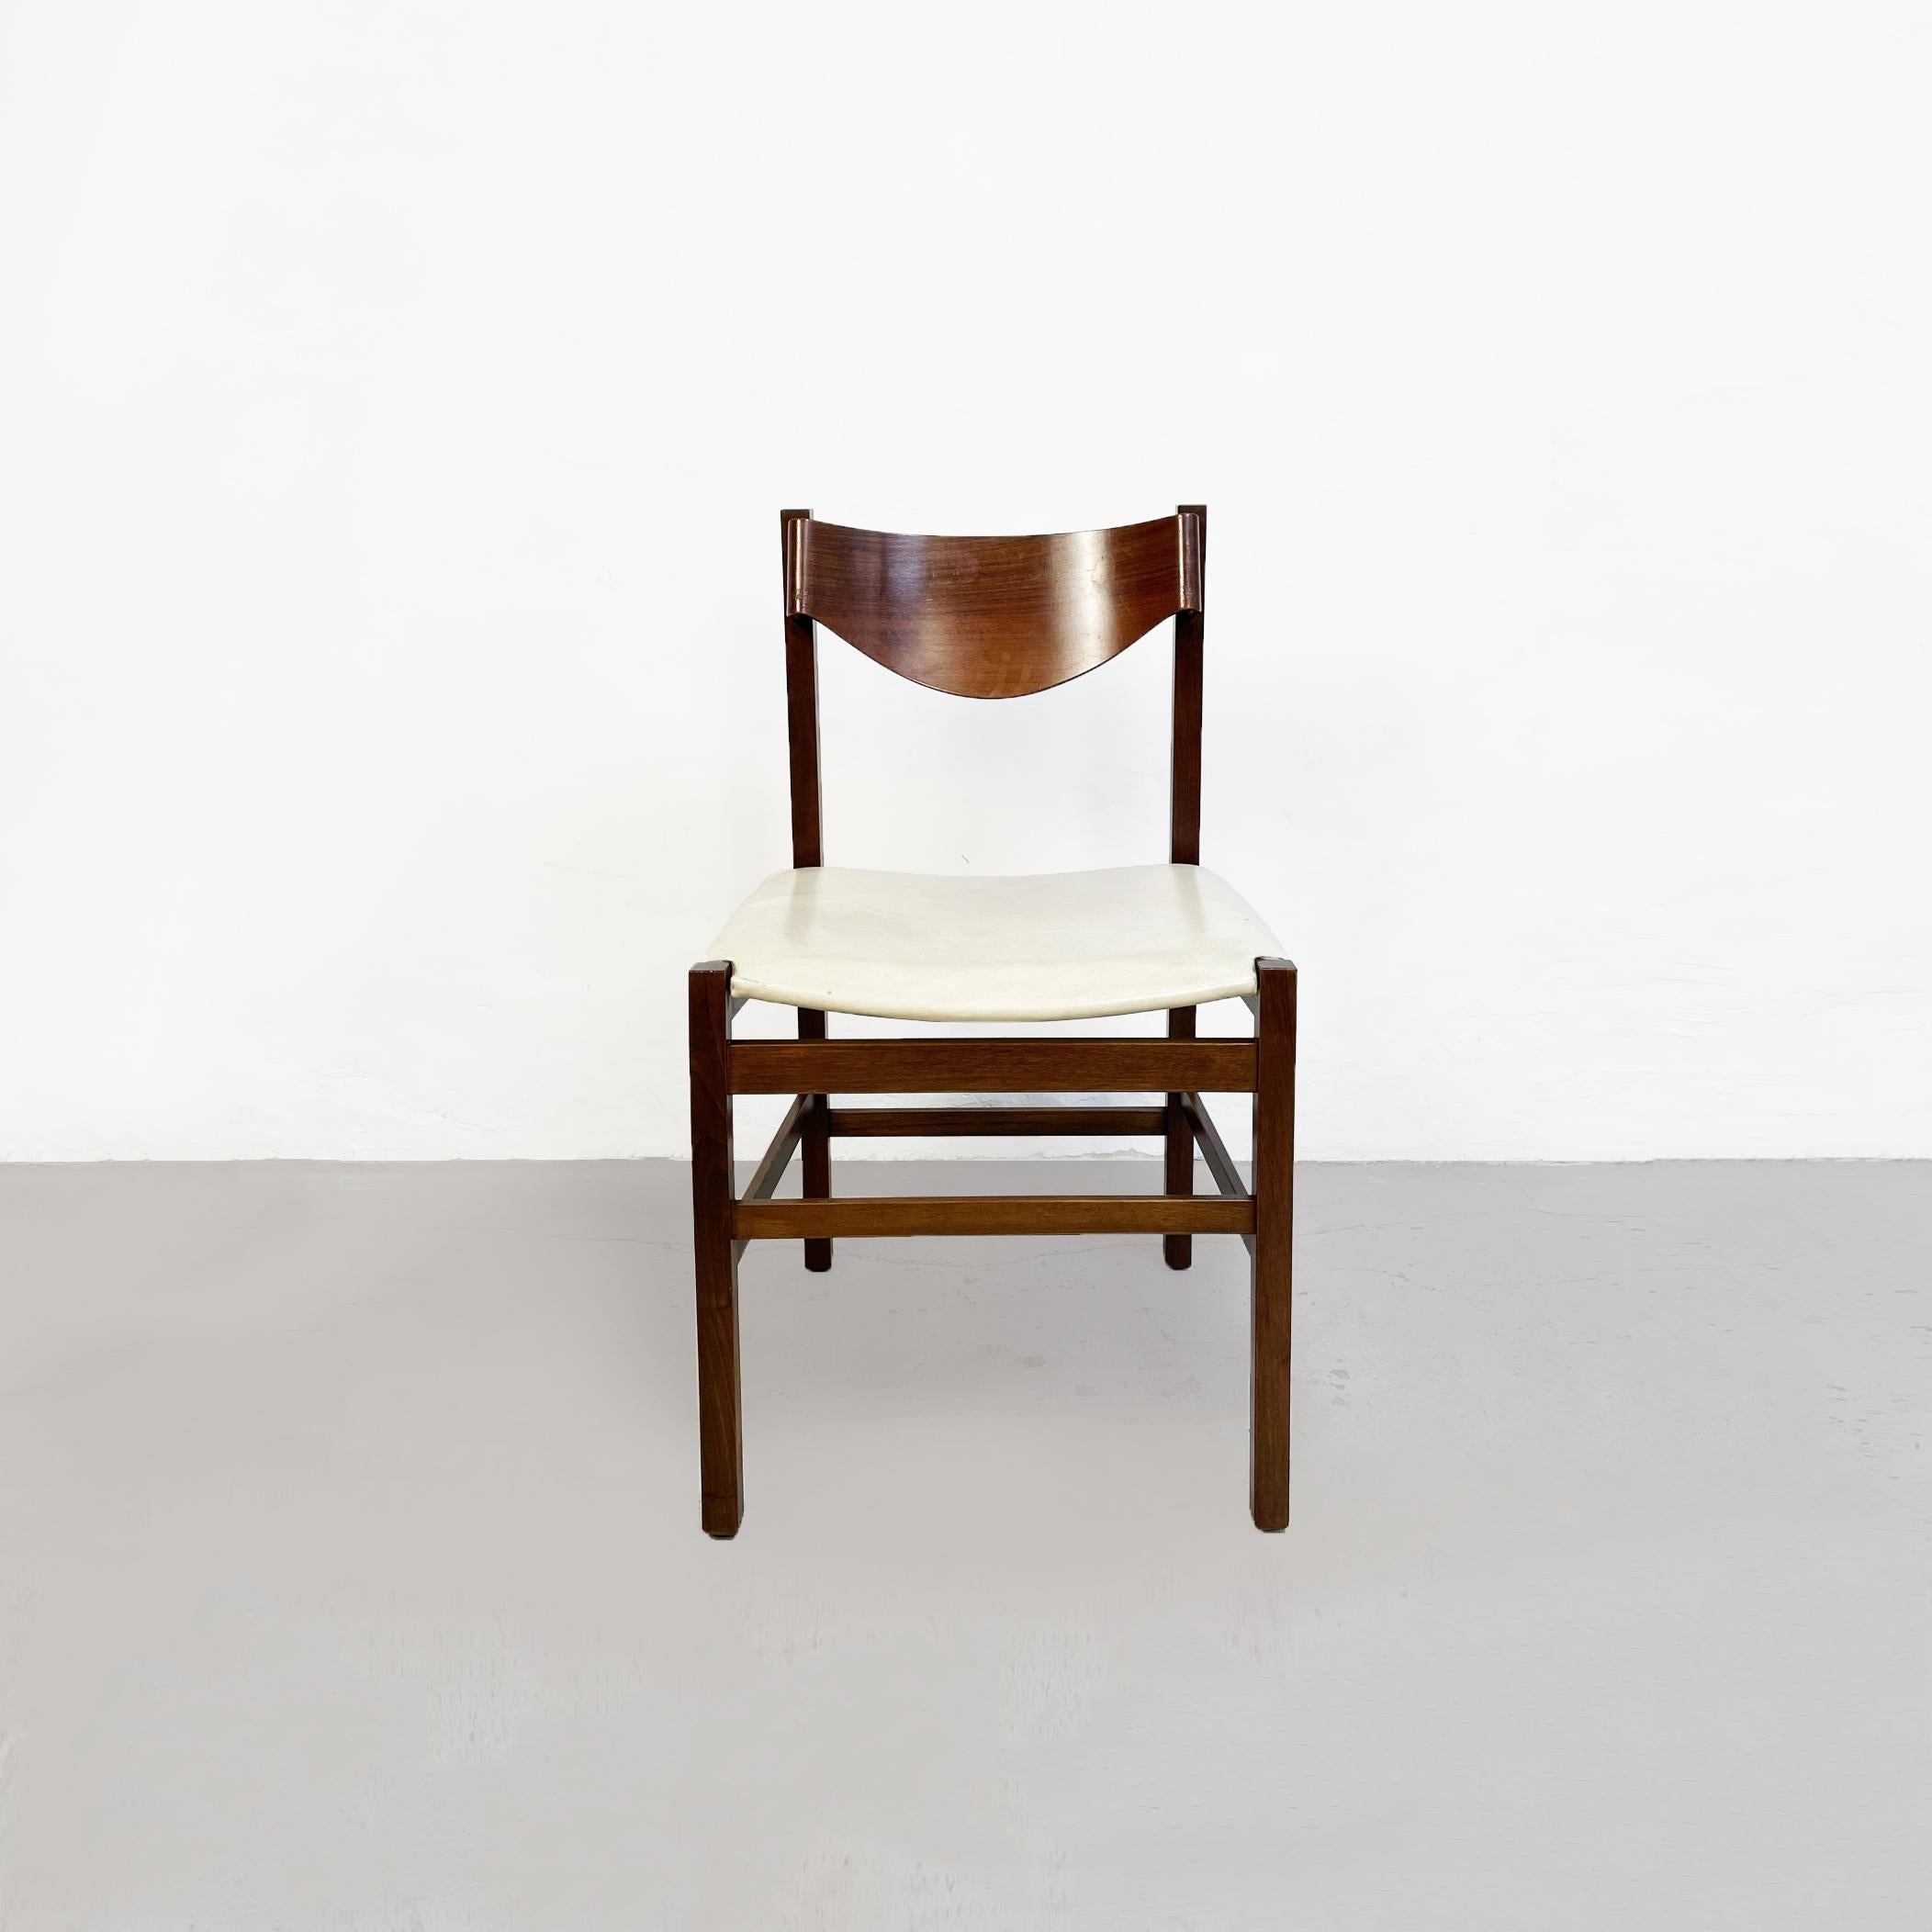 Italian Mid-Century Modern wooden chair with leather square seat, 1960s.
Wooden chair with white ivory leather square seat. It has a curved backrest.
1960s.
Good conditions, signs present on the seat.
Measurements in cm 47x44x81H 46H seat.